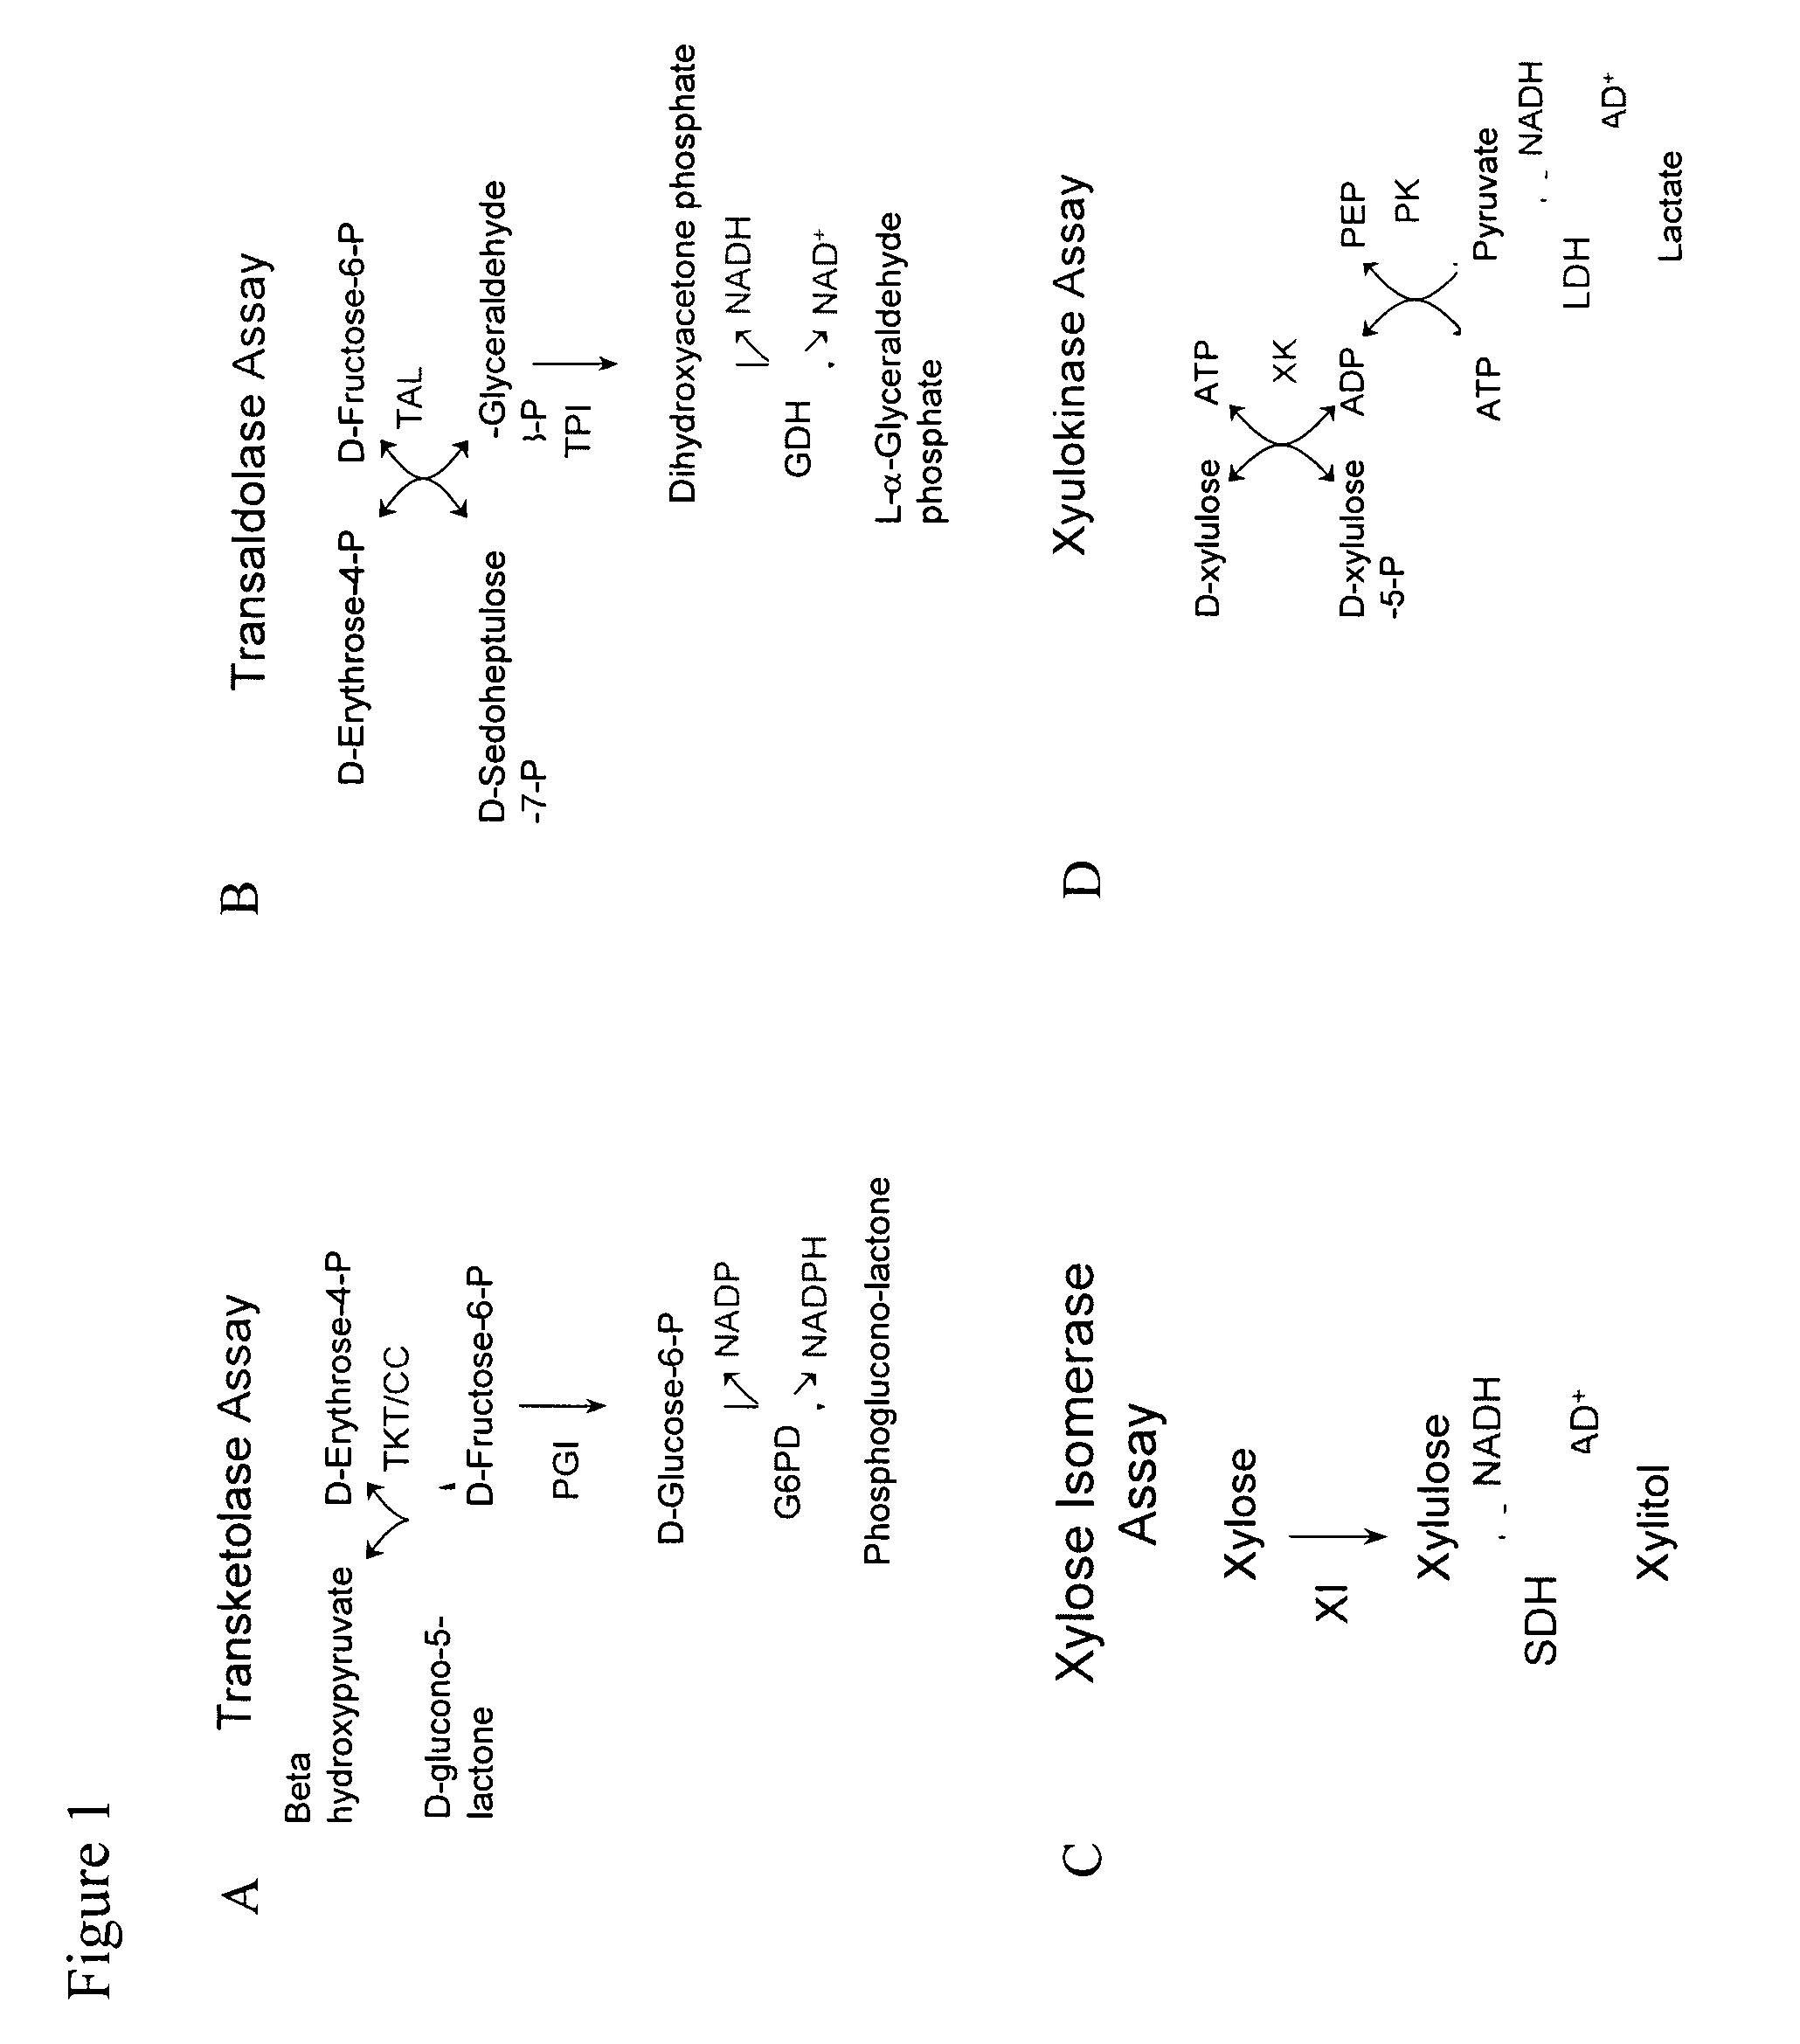 Ethanol production in fermentation of mixed sugars containing xylose